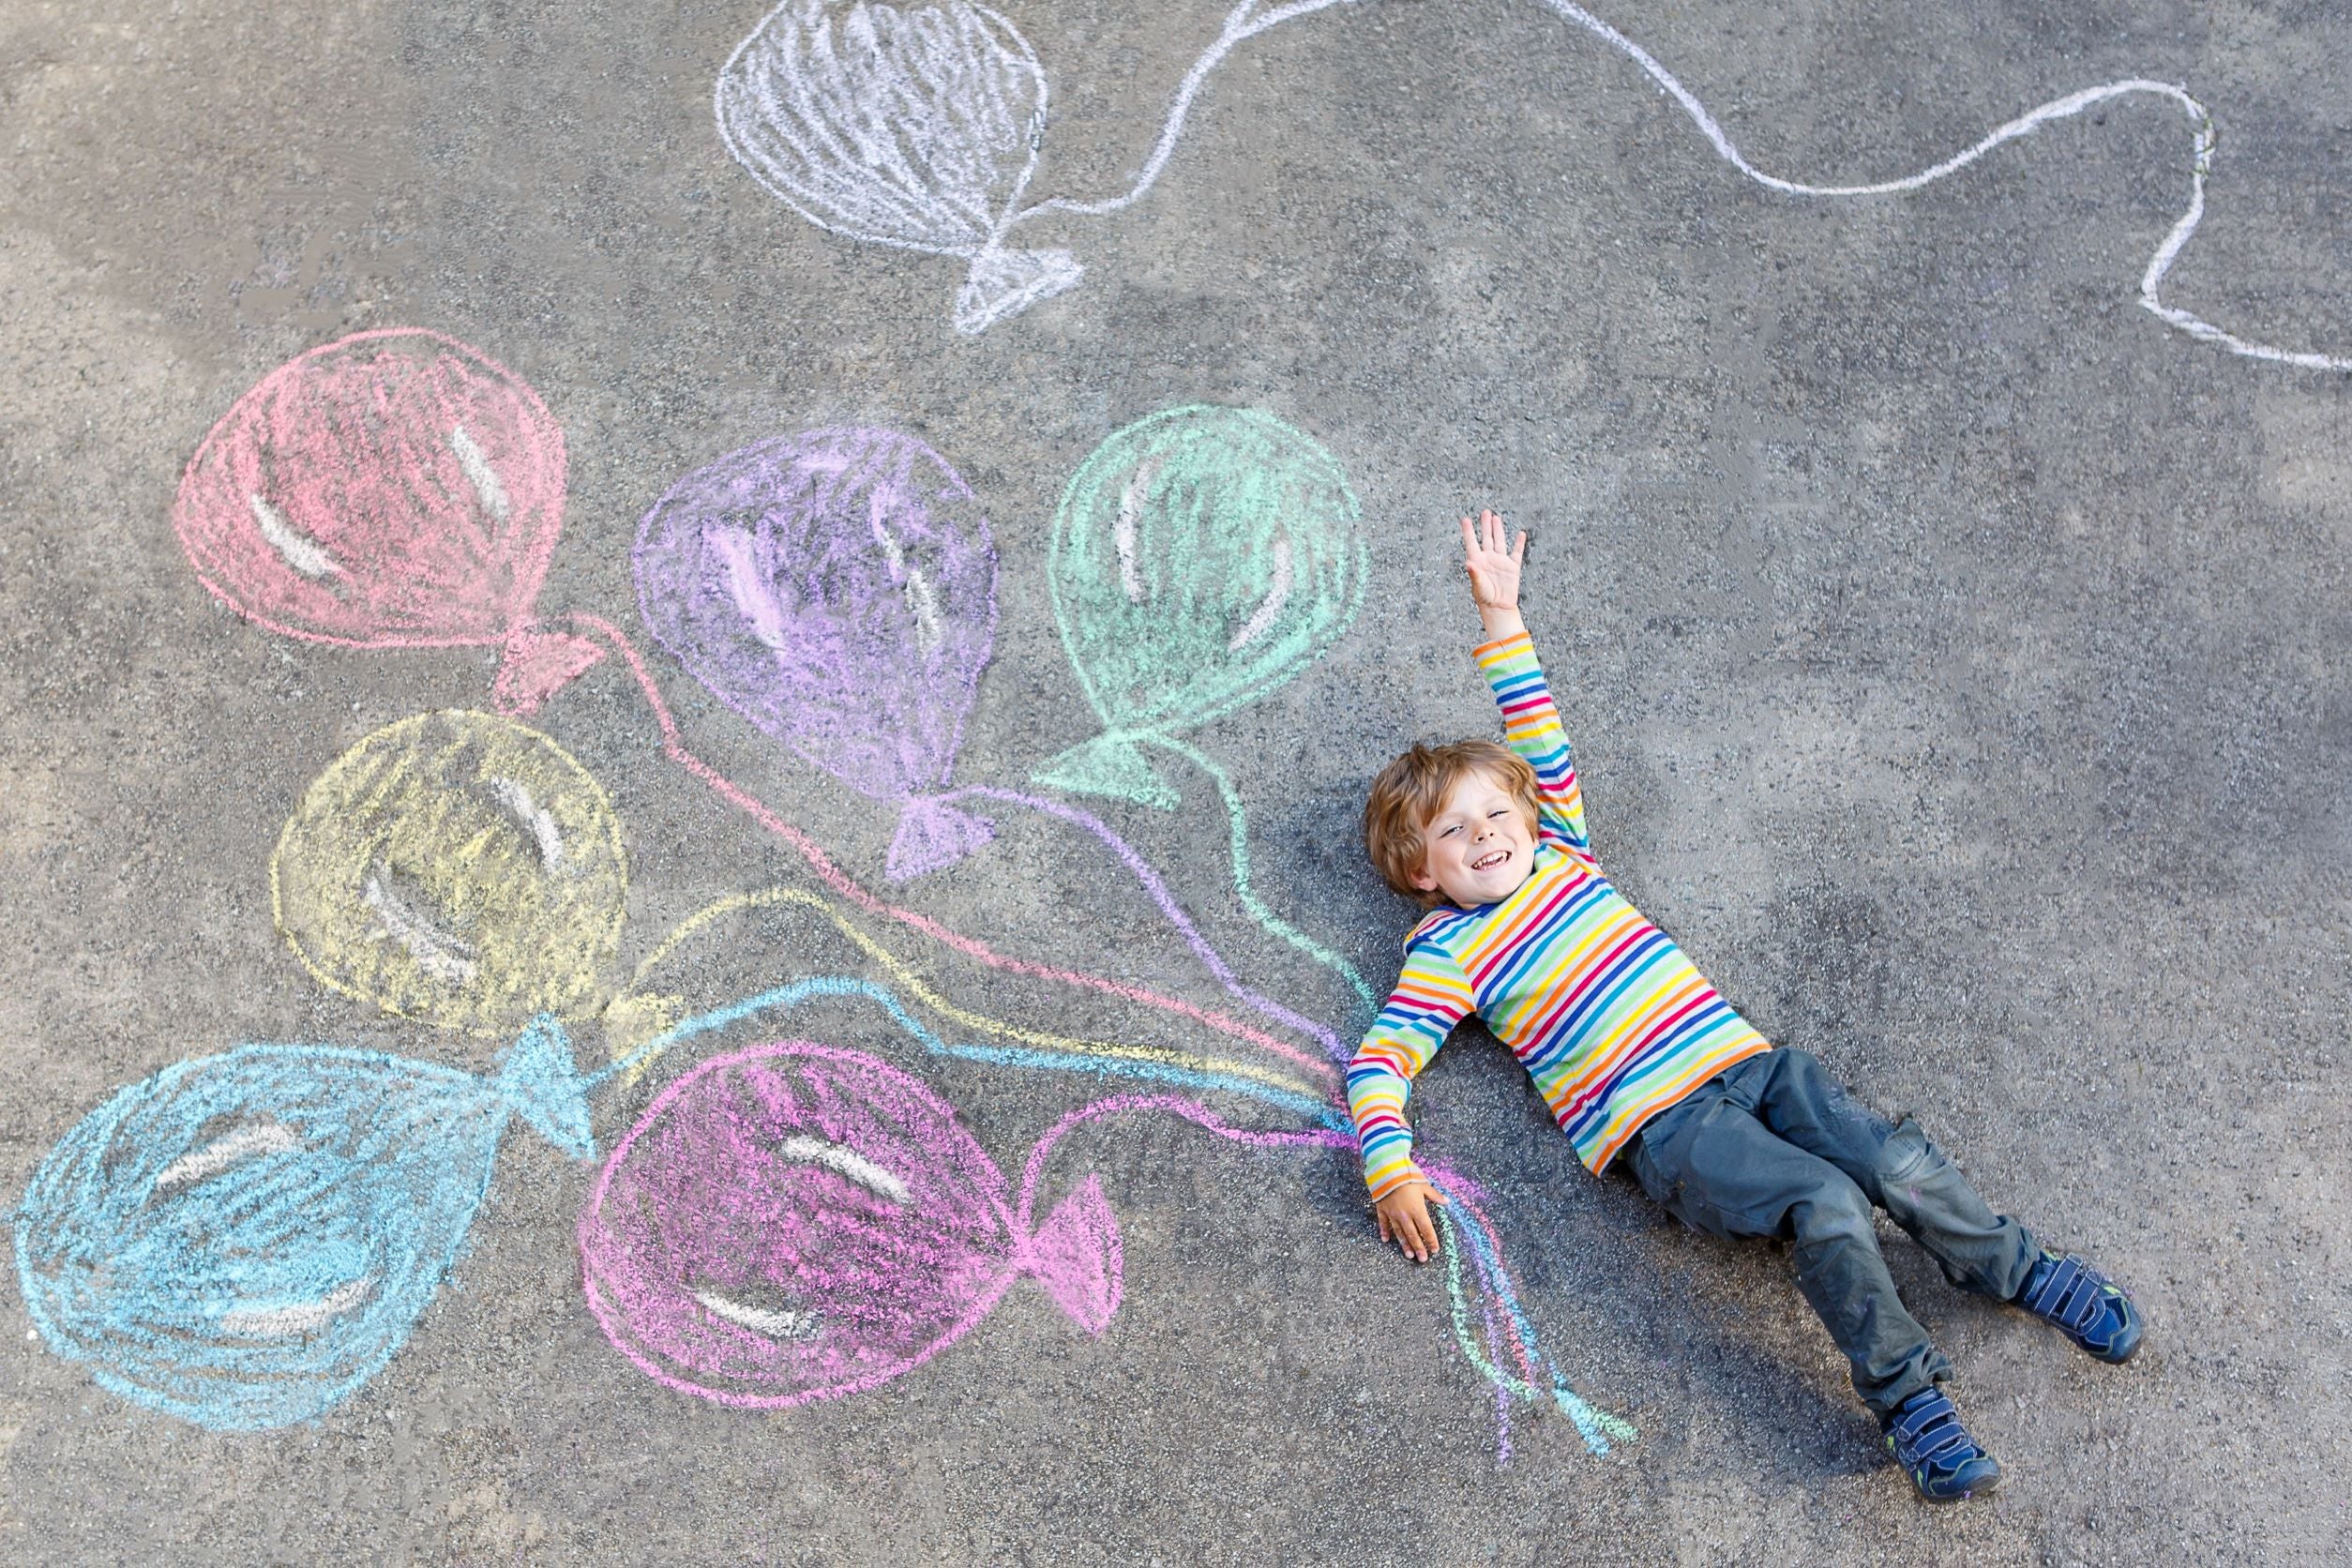 How to Learn and Relax with Chalk Art - The Adventurous Child